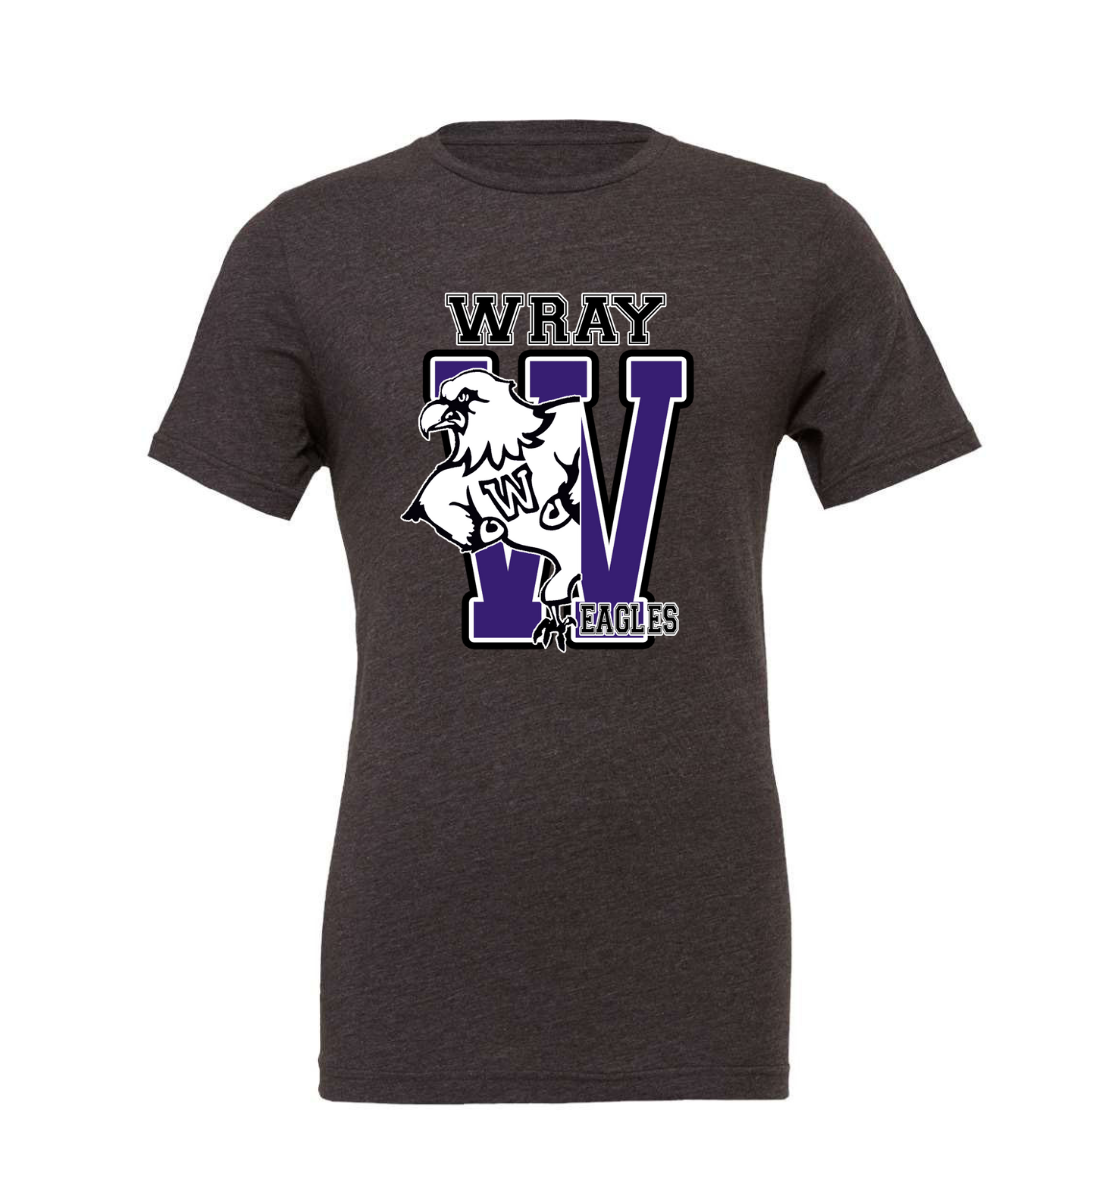 wray eagles youth t-shirt: for young eagles fans only!